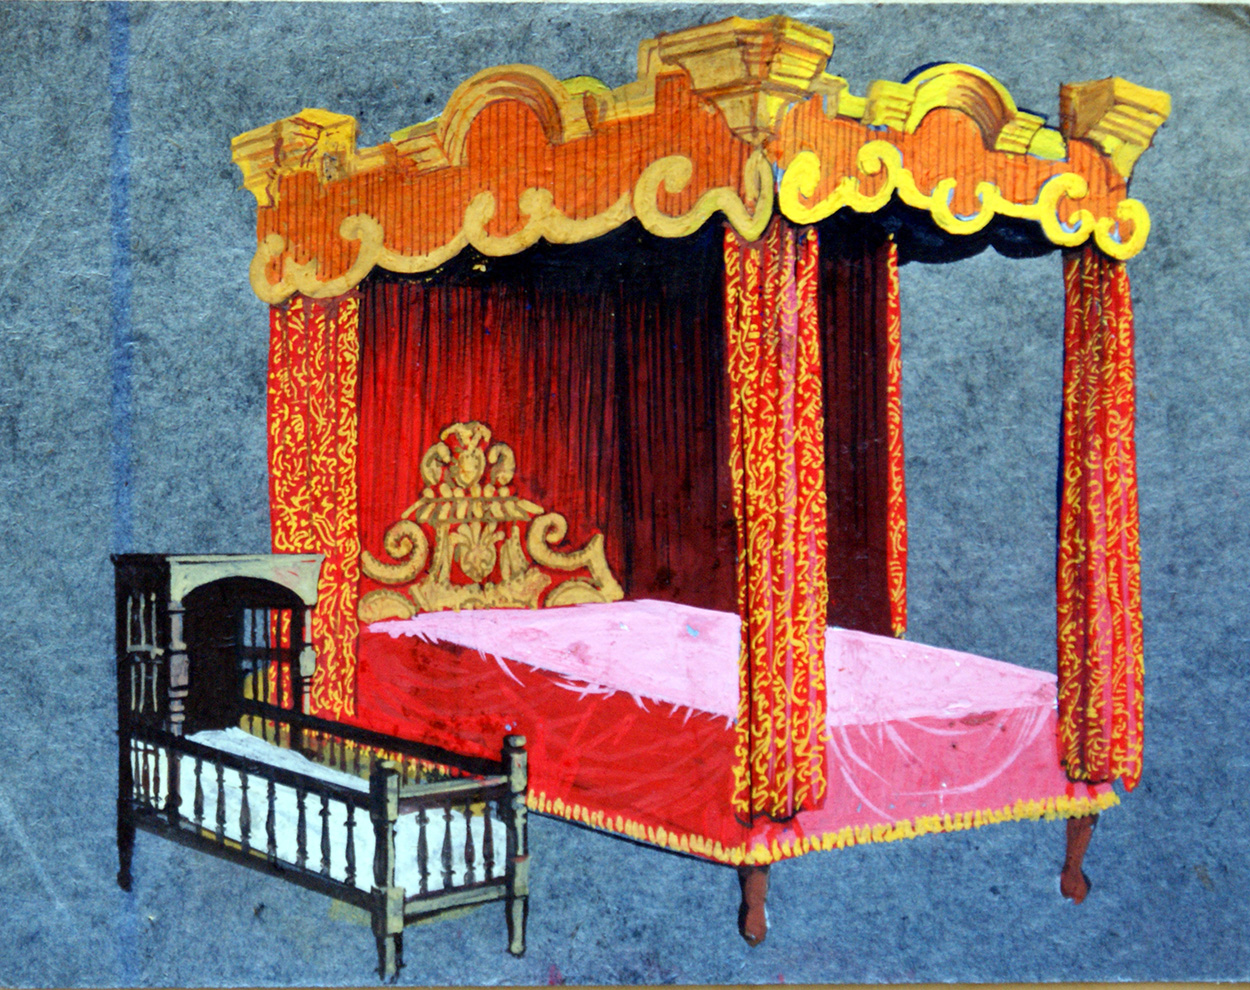 Royal Bed and Cot (Original) art by Jesus Blasco at The Illustration Art Gallery